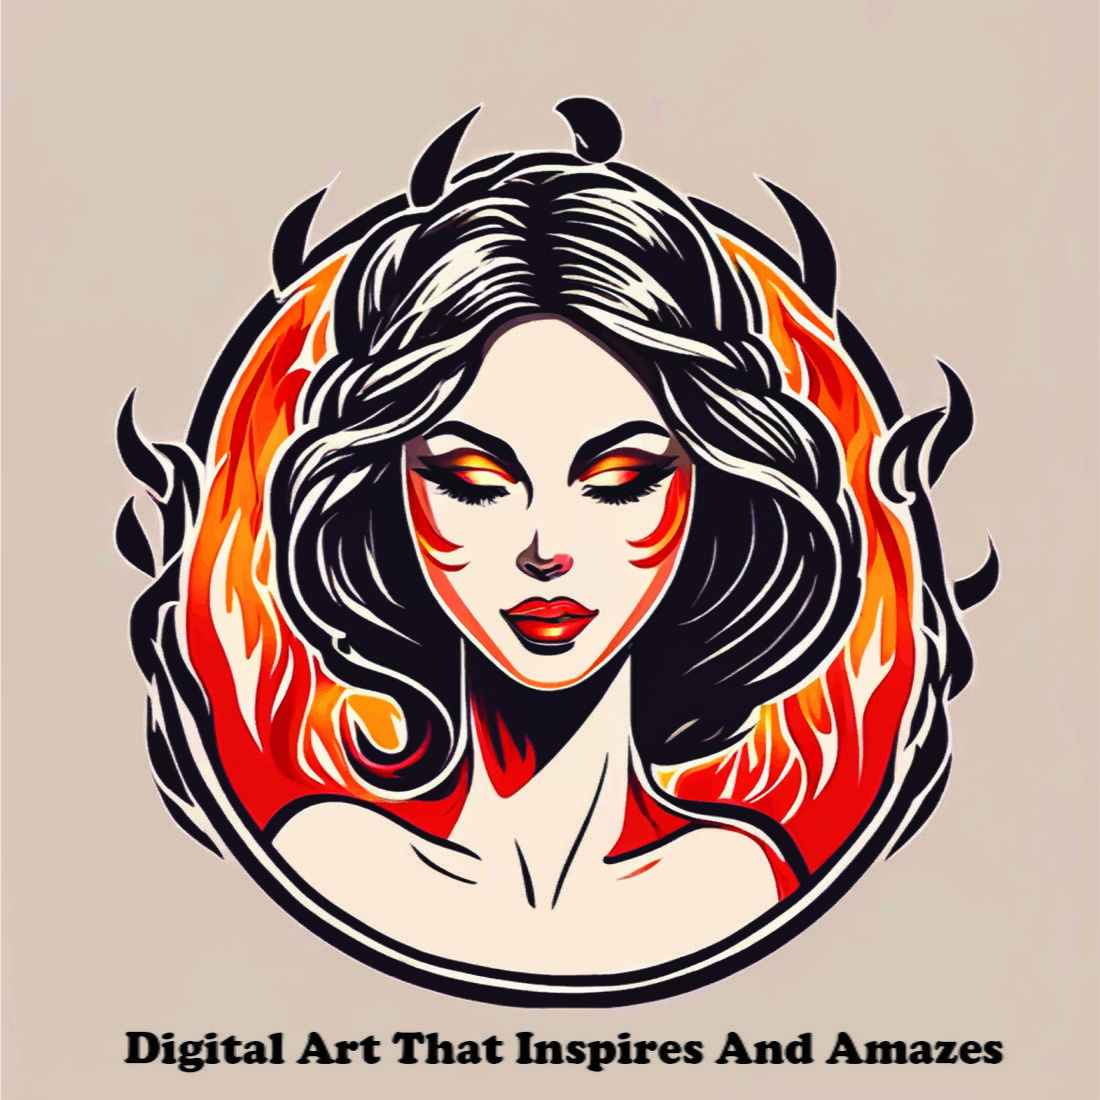 Fiery Woman illustration 4 Logos Deal cover image.